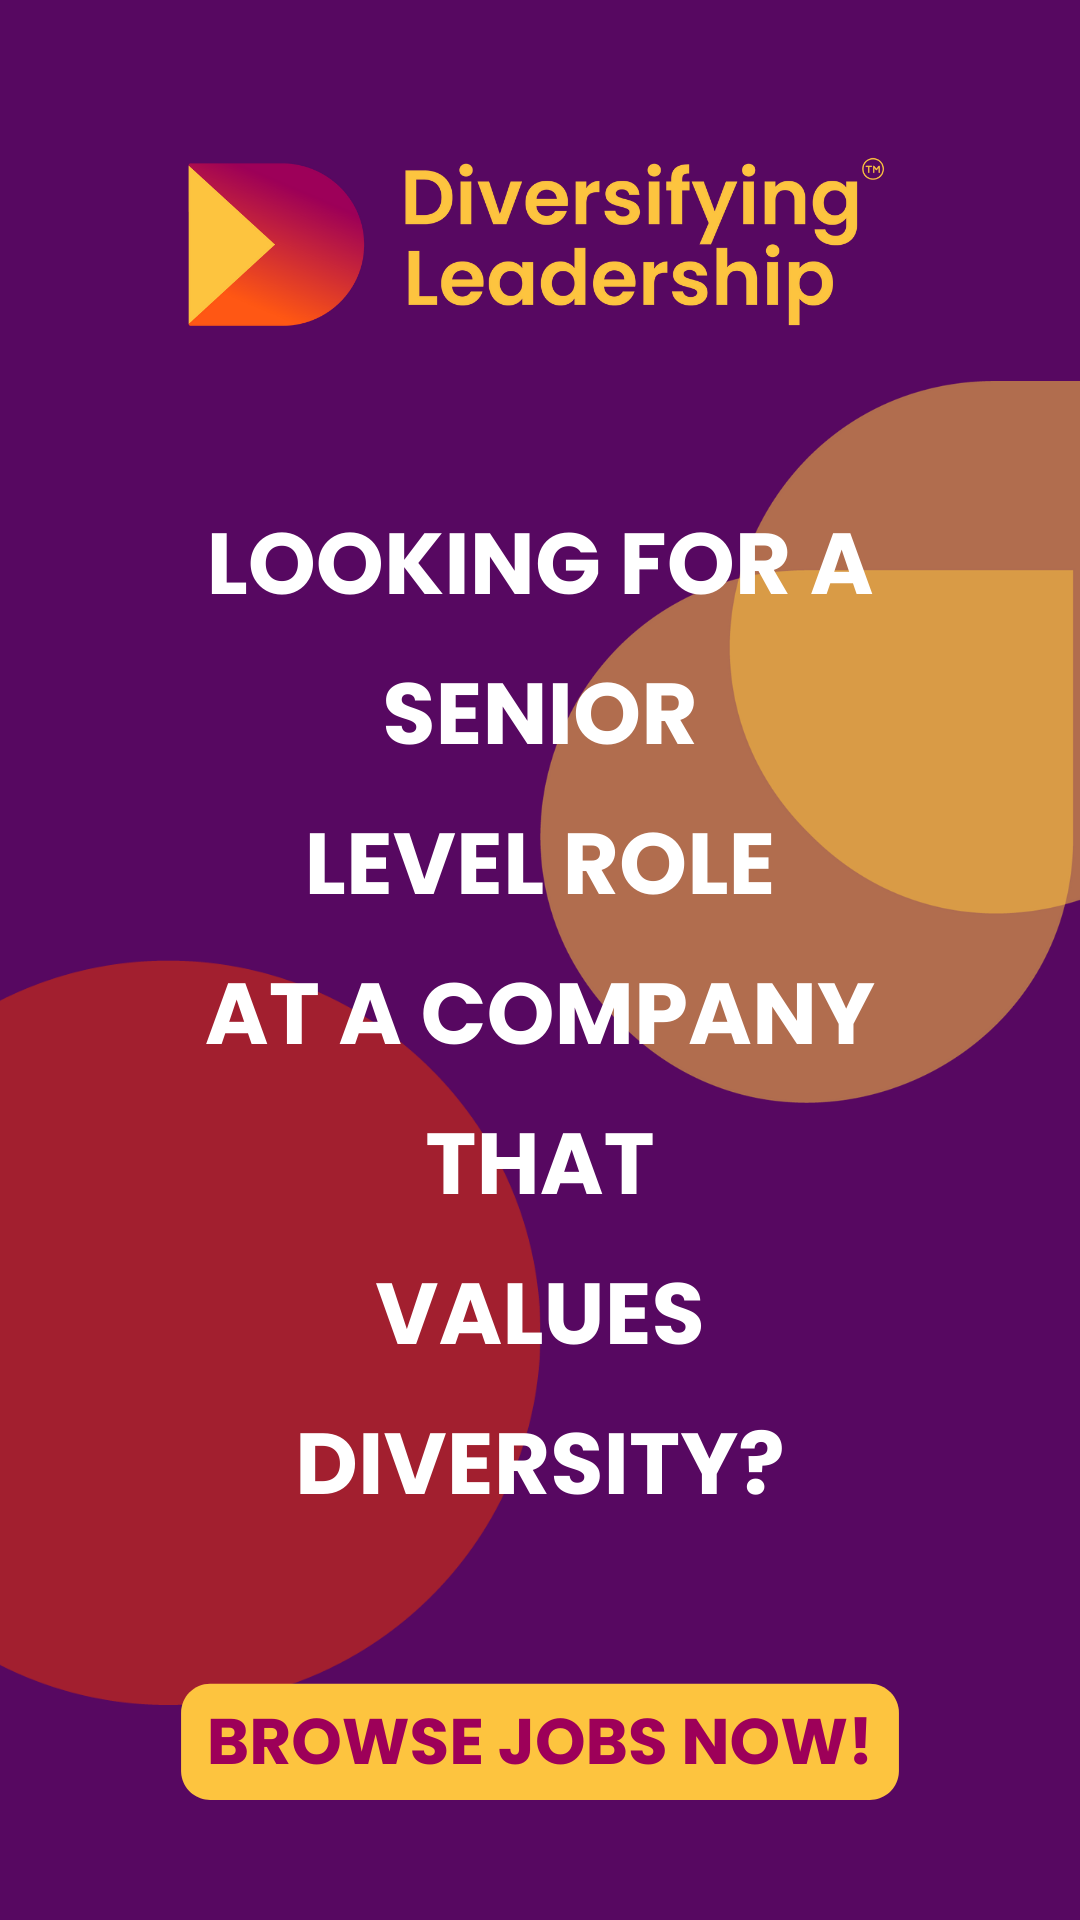 Diversifying Leadership. Looking for a senior level role at a company that values diversity? Click here to browse jobs now!